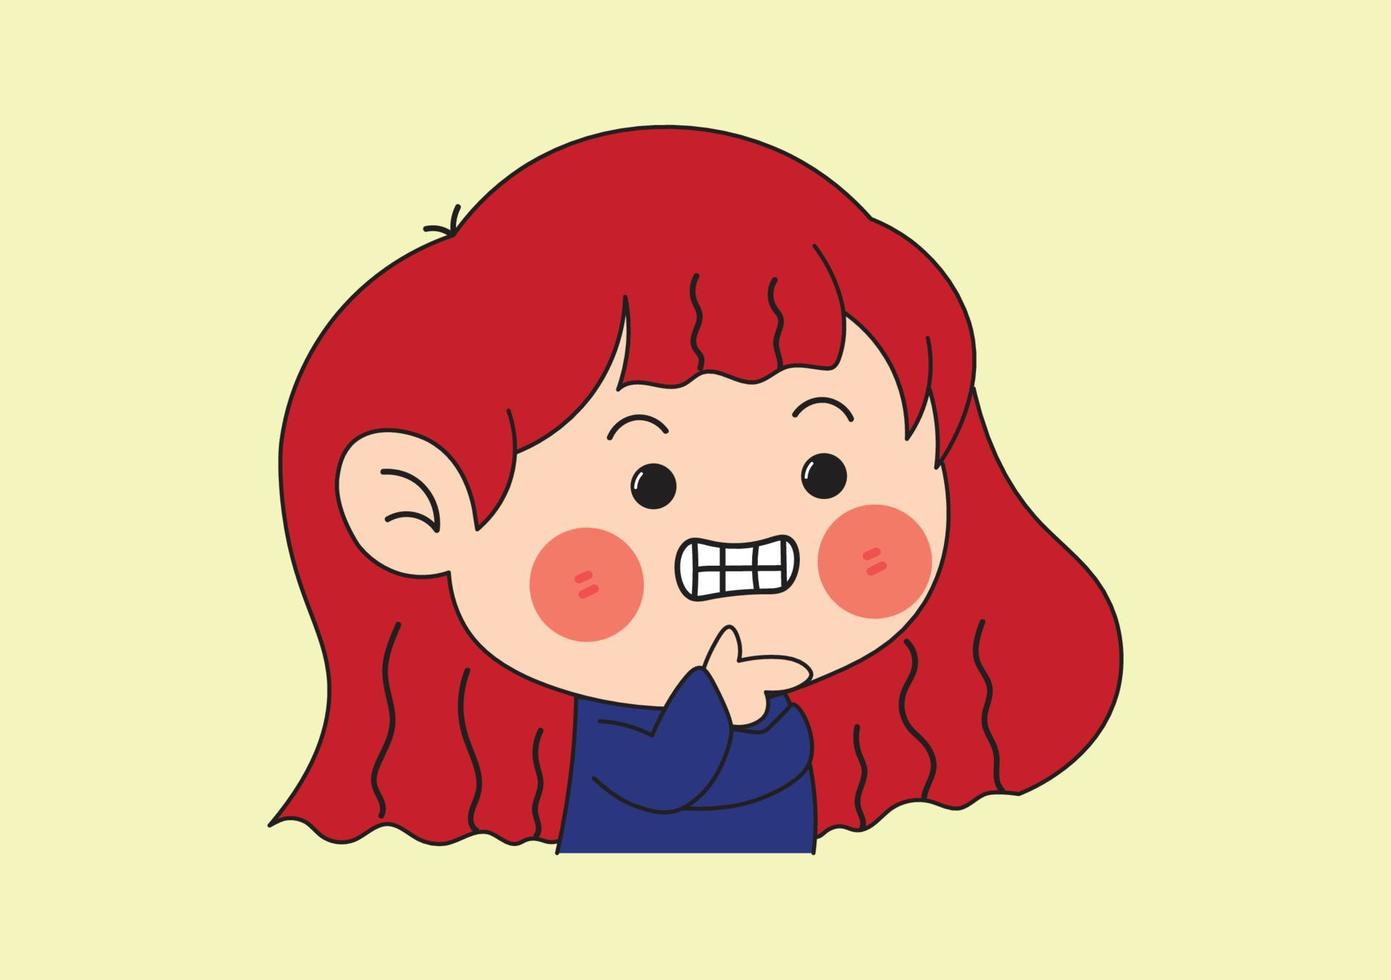 Cute Pointing Giggling Red Haired Girl Cartoon vector